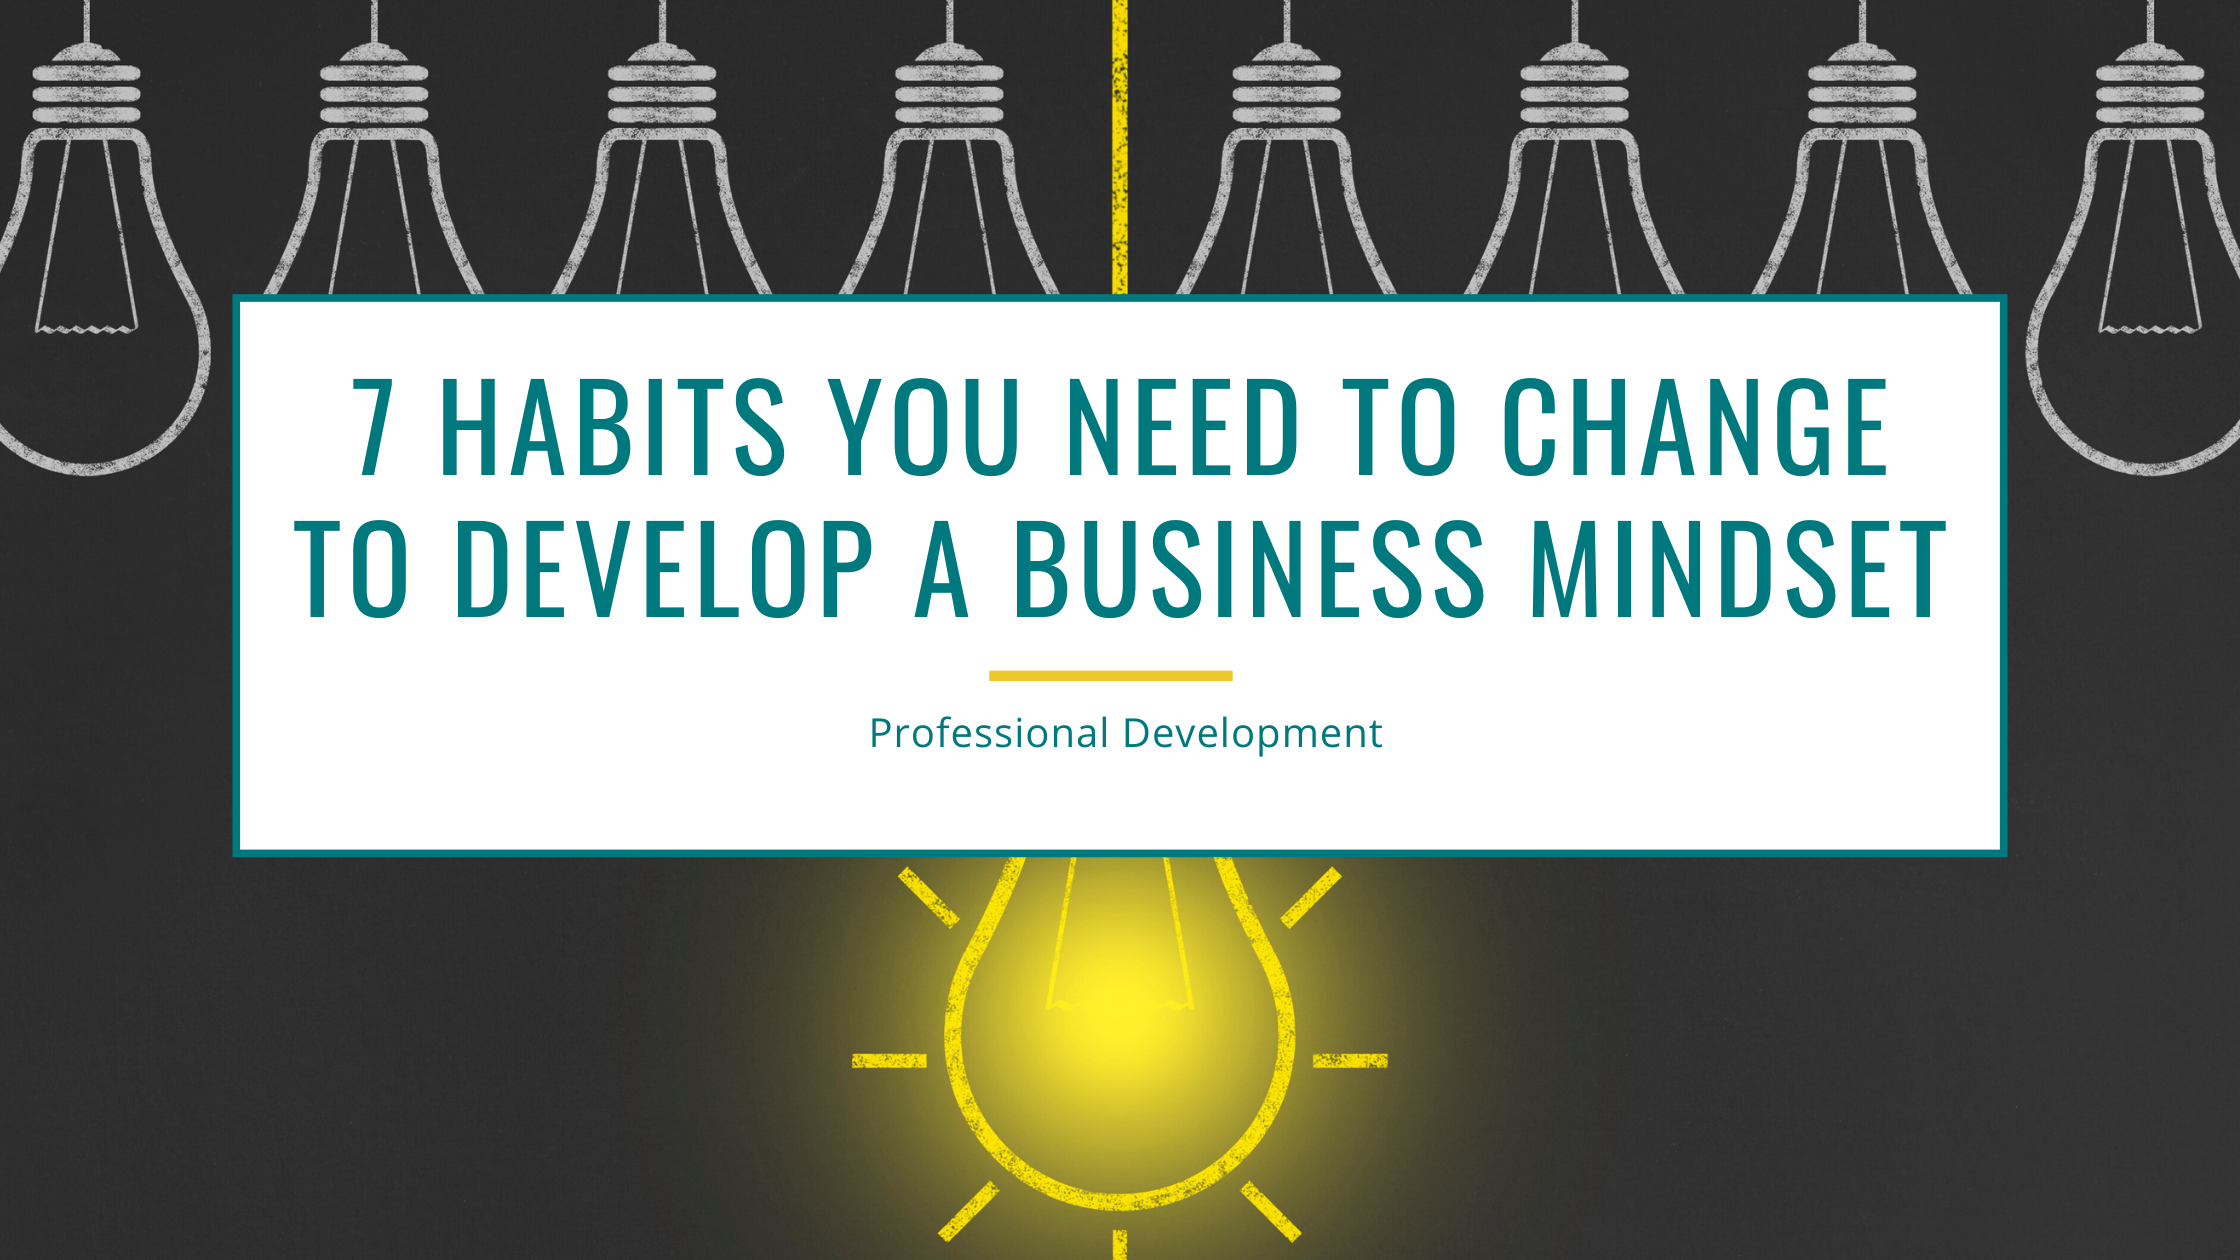 7 Habits You Need to Change to Develop a Business Mindset for Professional Development